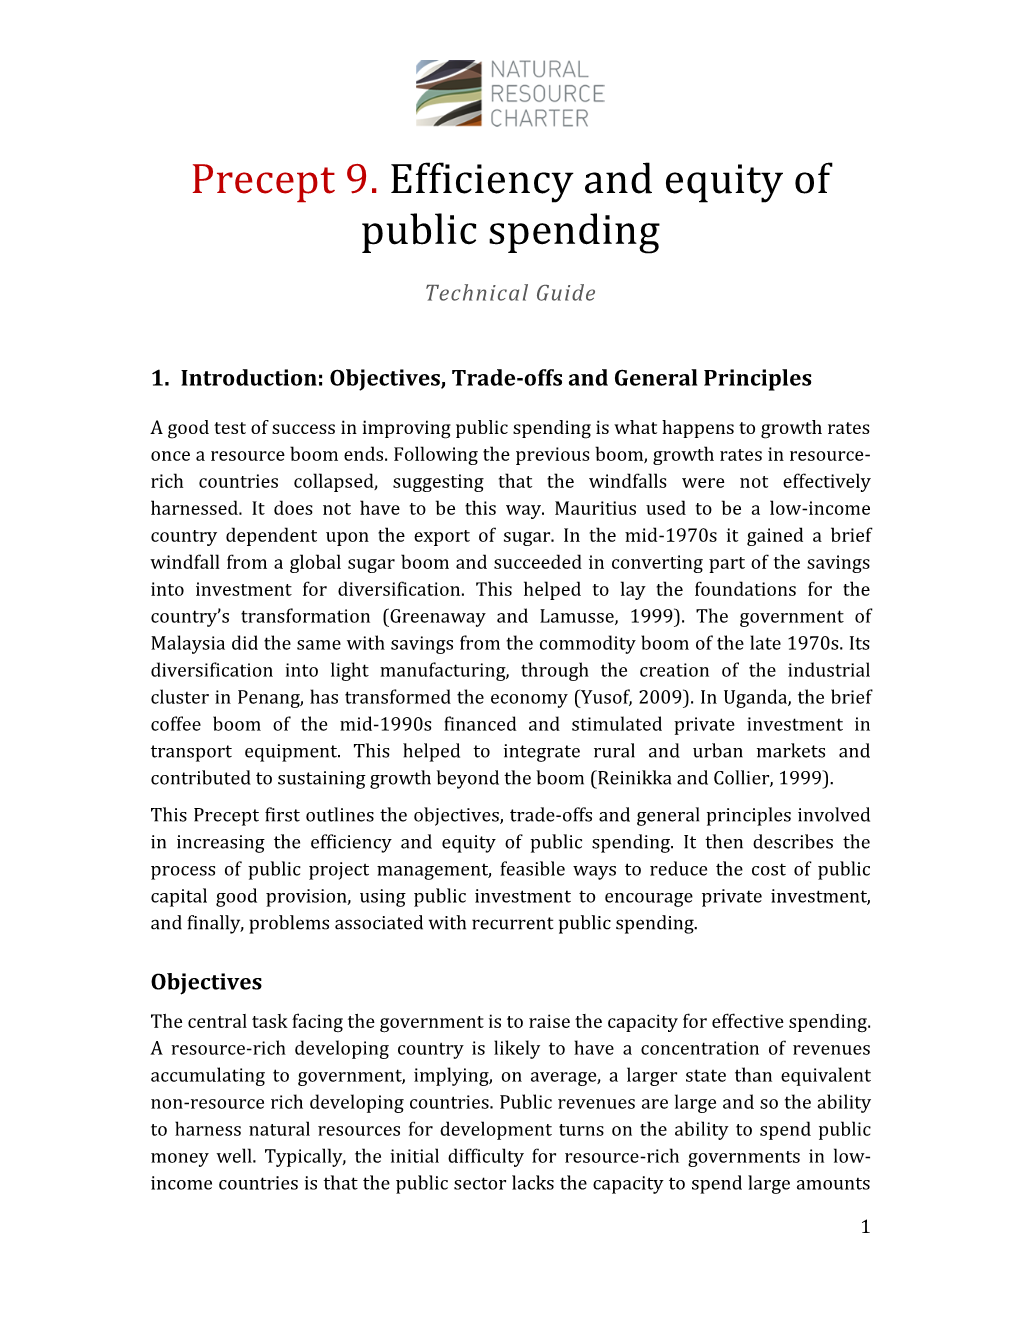 Precept 9. Efficiency and Equity of Public Spending